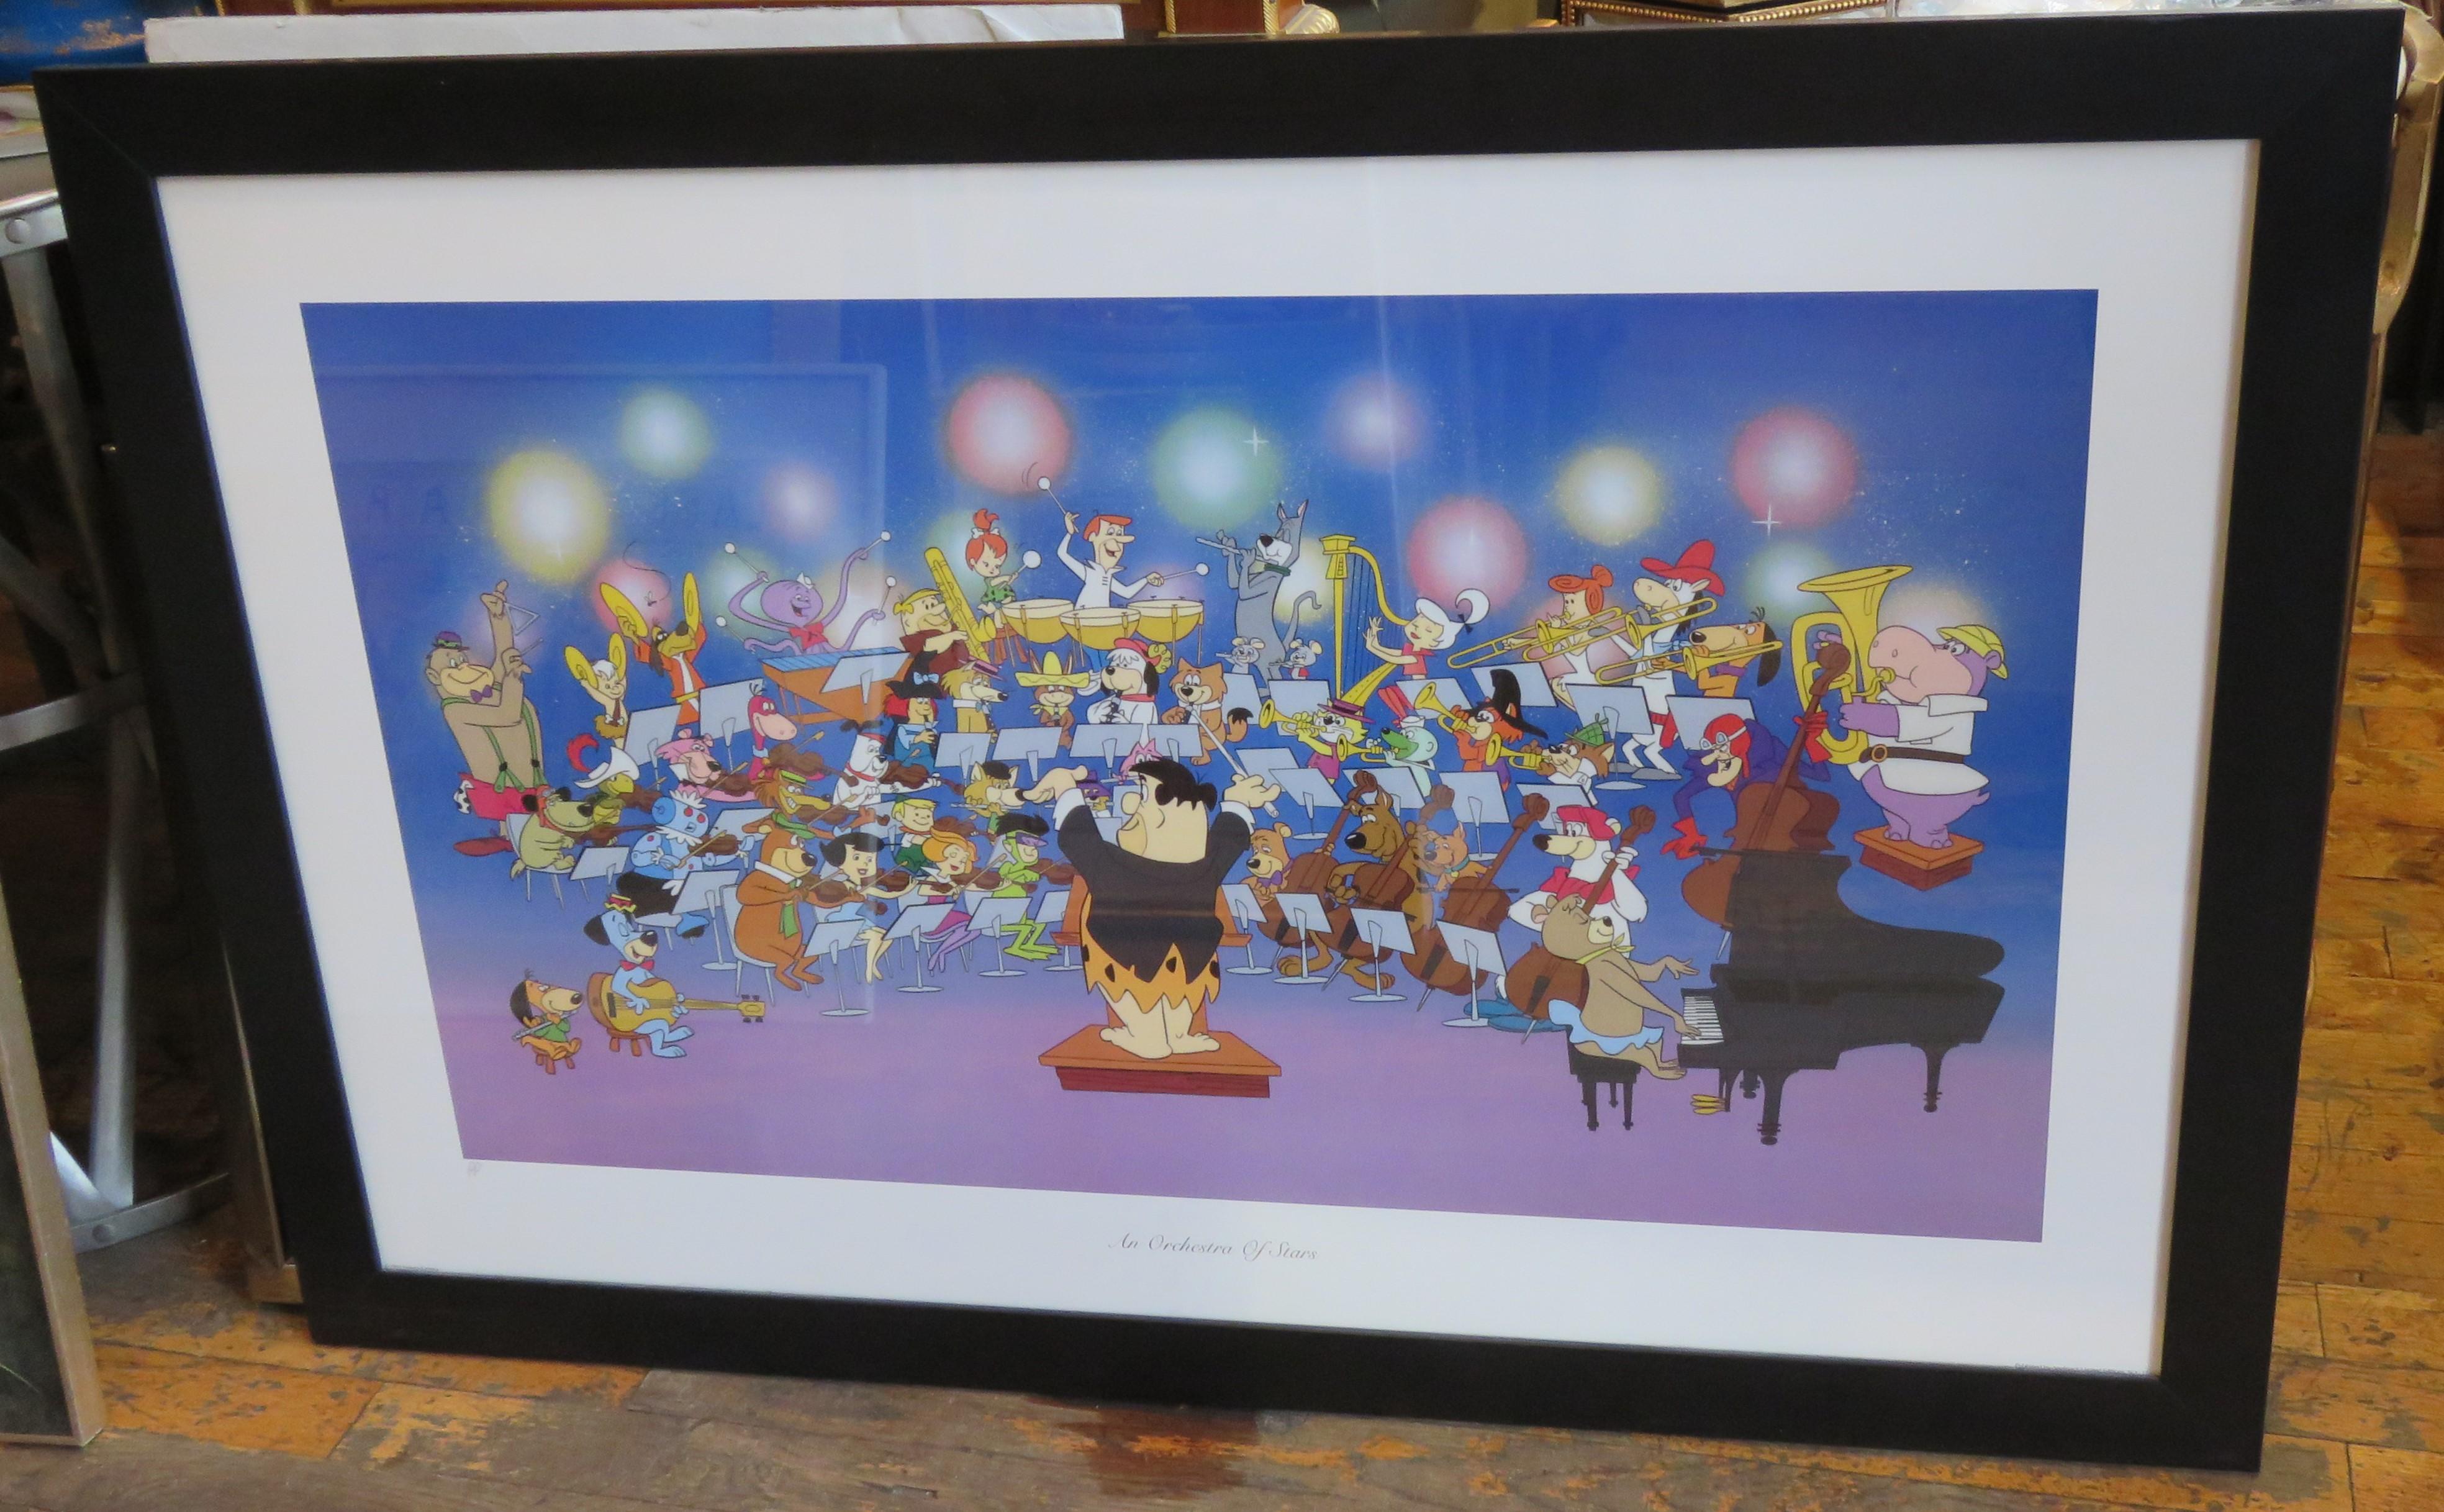 The Following Item we are Offering is A Rare Large DELUXE PRINTERS PROOF Pop Art Serigraph of World Renowned Cartoonists Bill Hanna and Joe Barbera Flinstones and the Jetsons!! Labeled PP Lower Bottom. Beautifully done with very Fine Detail. Titled